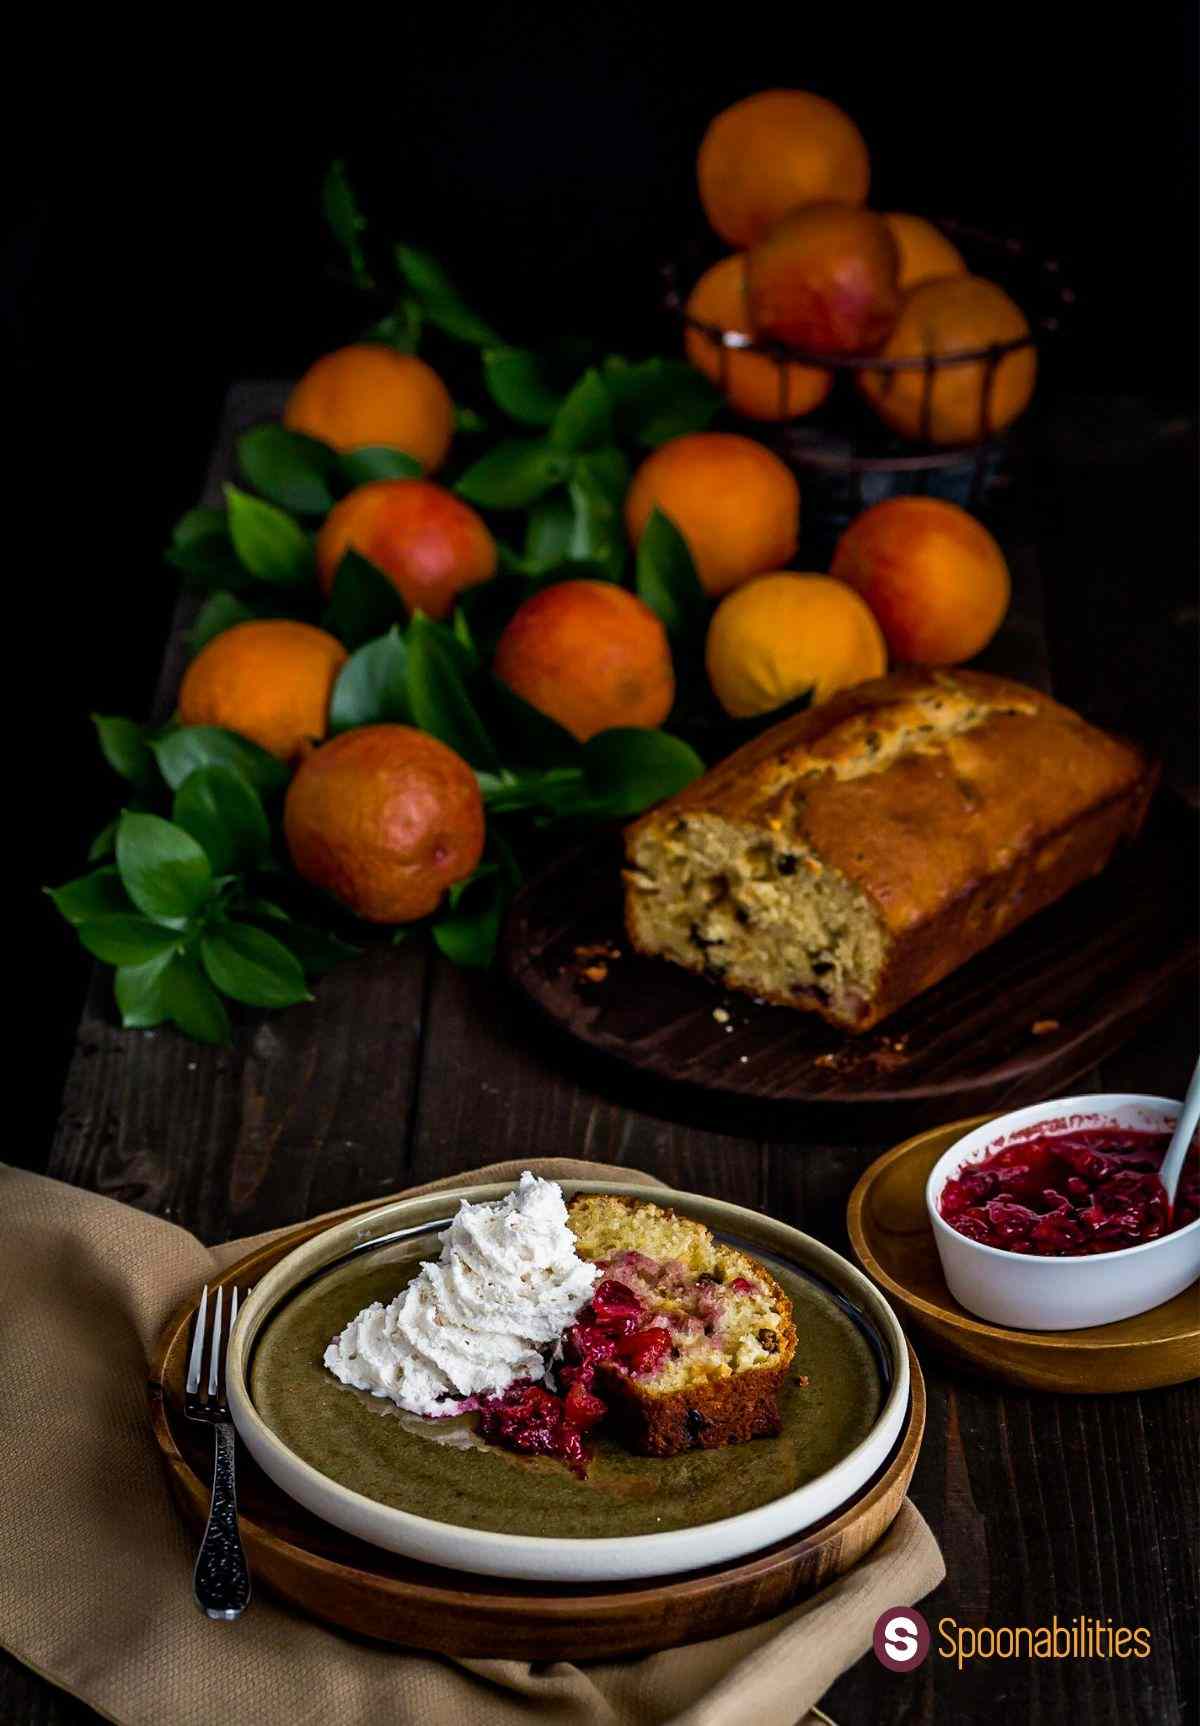 A slice of Blood Orange olive oil cake in the front of the photo on a plate, with compote on the side. Several blood oranges scattered in the background. More gourmet recipes at Spoonabilities.com